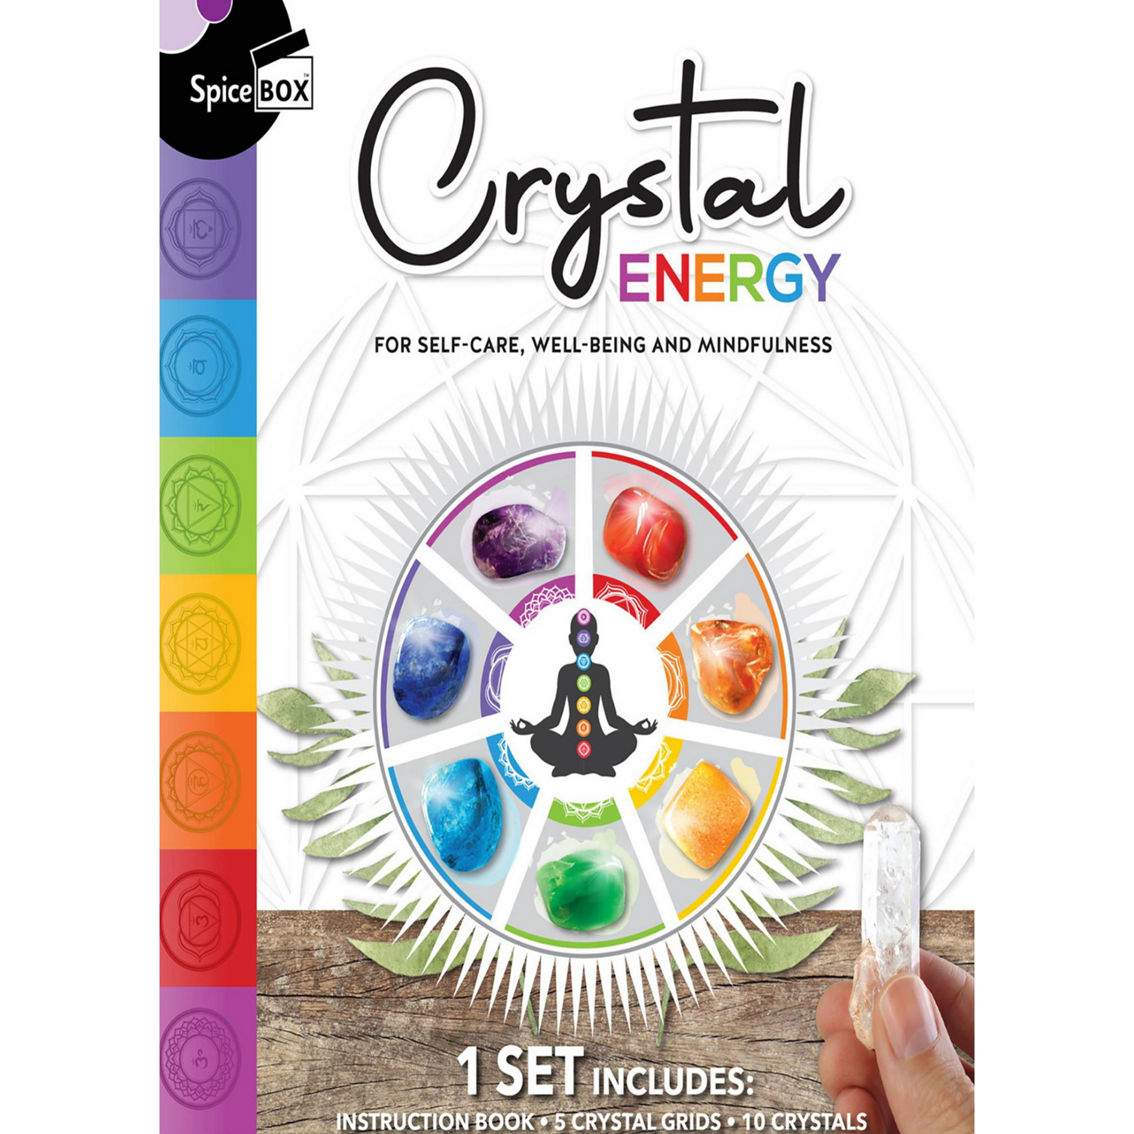 SpiceBox Gift Box: Crystal Energy - Image 5 of 5